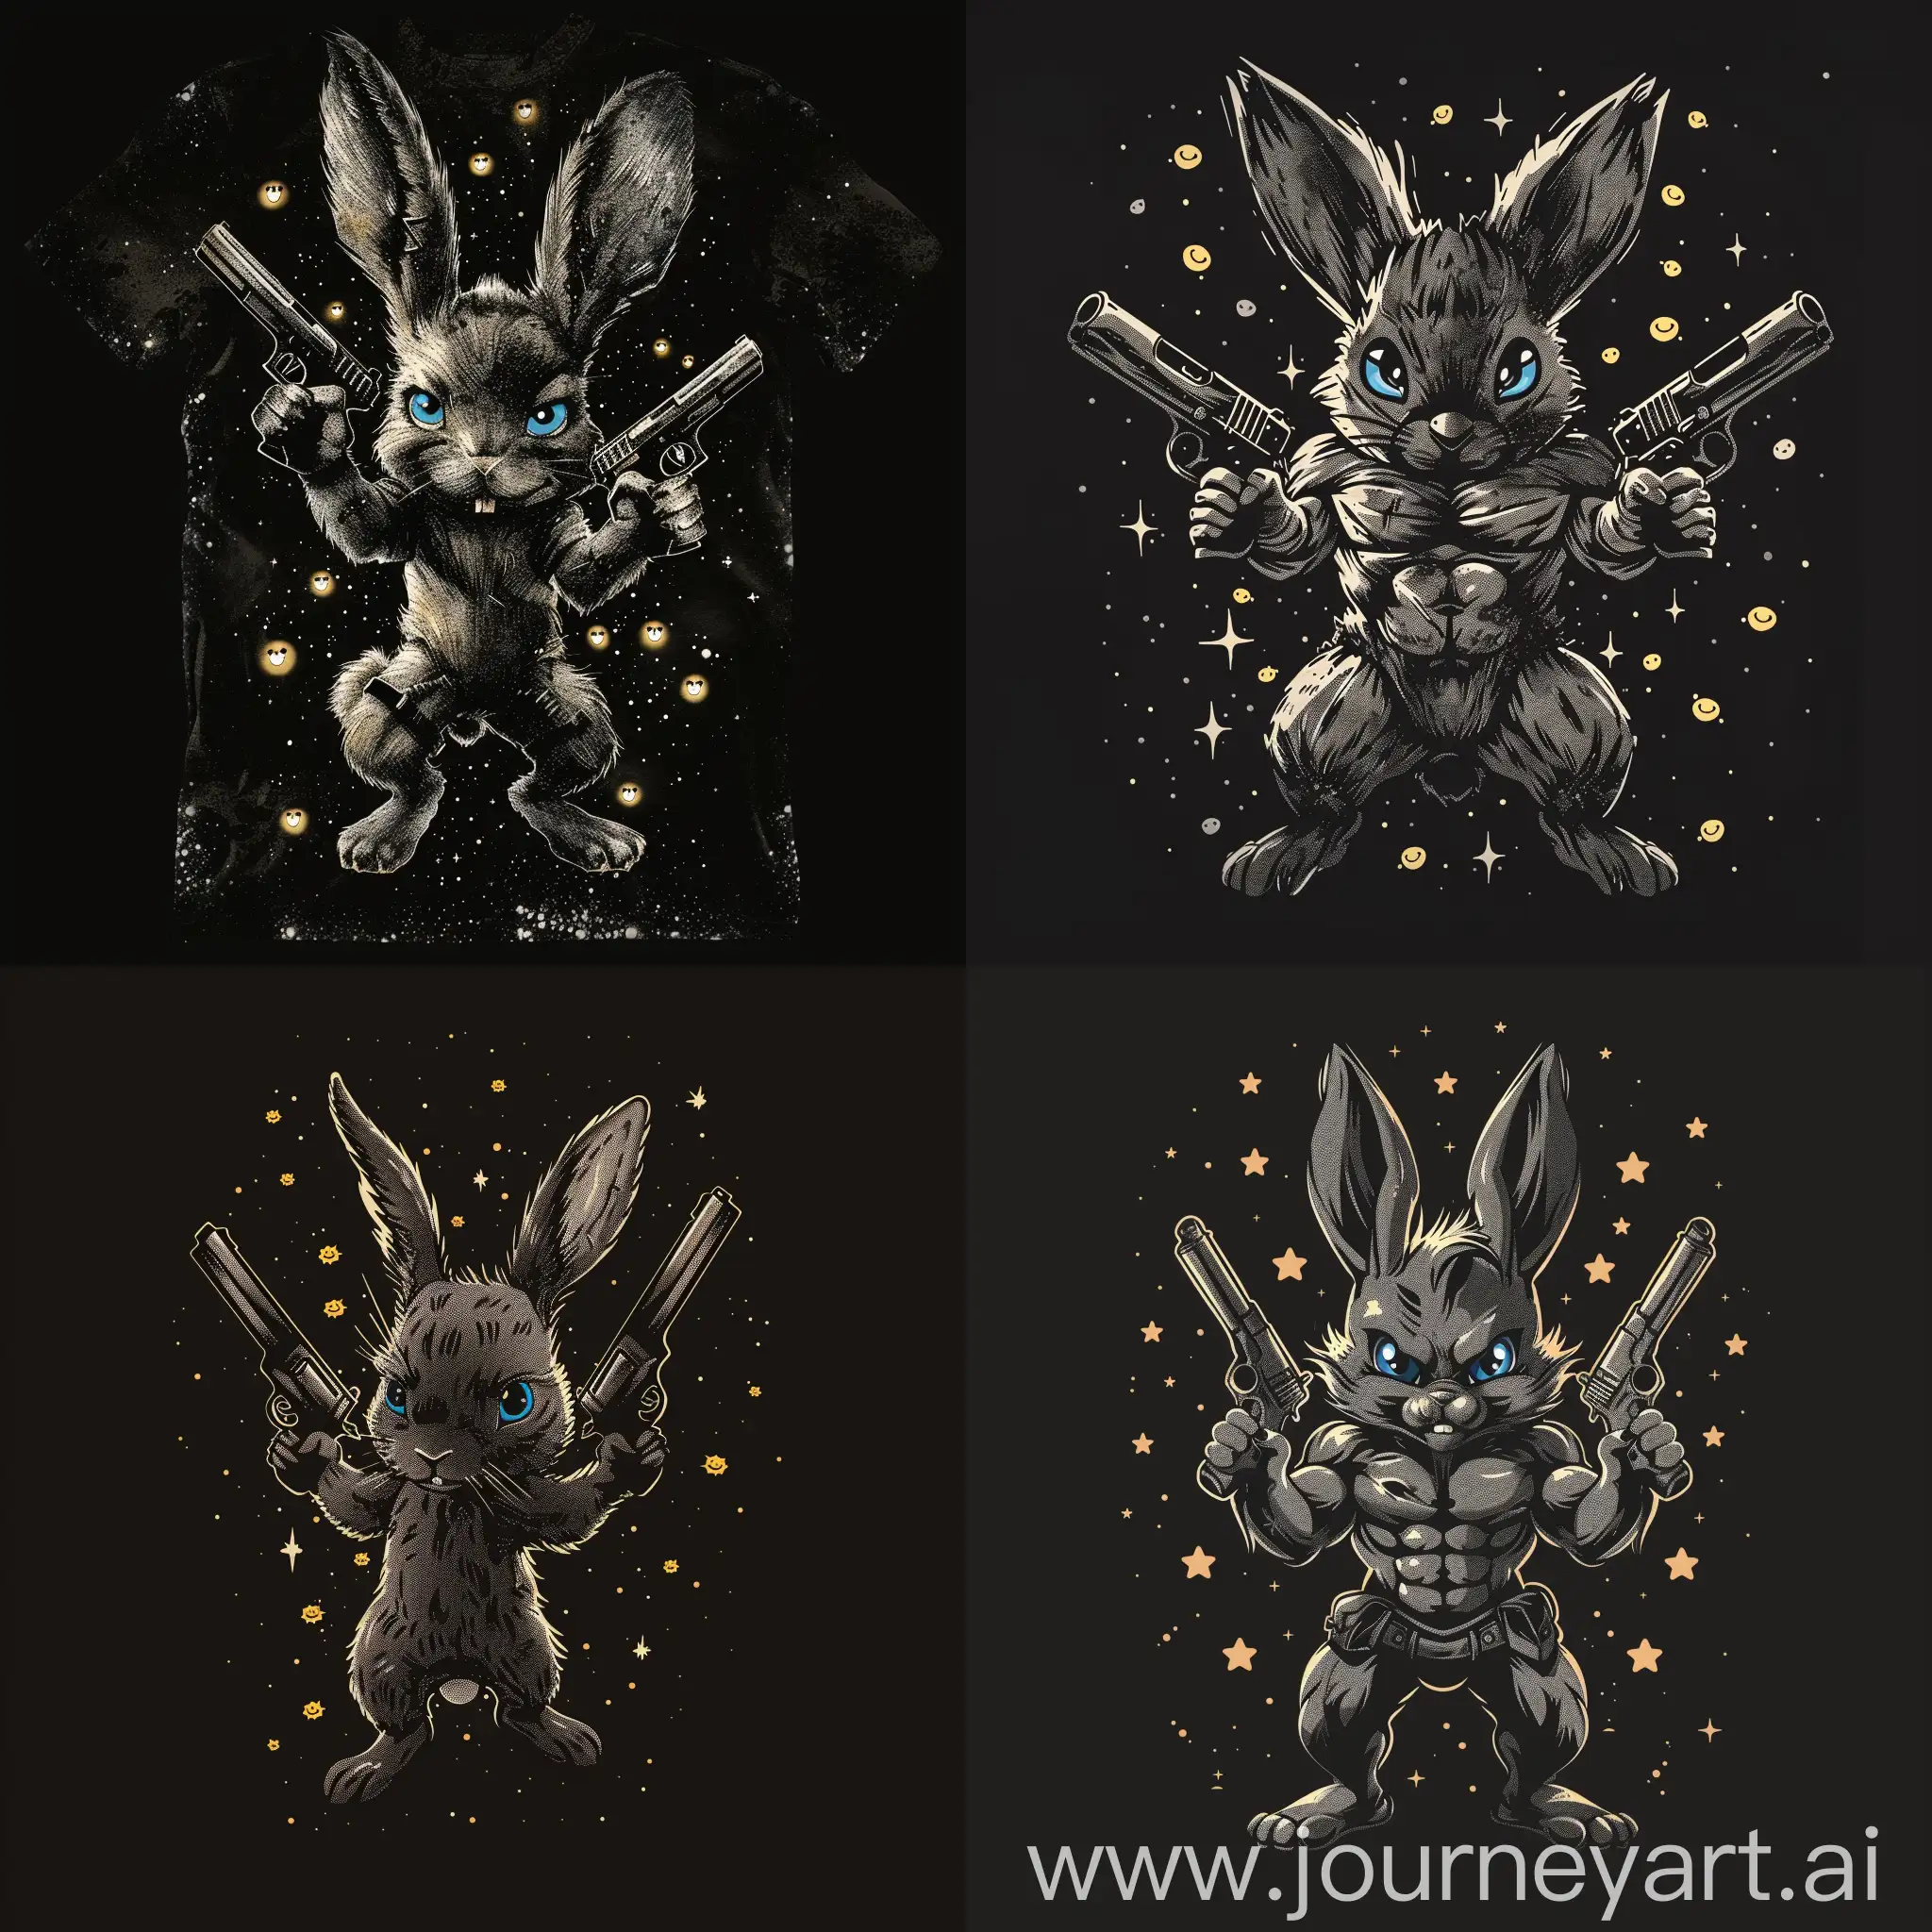 This amazing T-shirt design features a small, muscular black rabbit with blue eyes holding two firearms. The background is a deep, dark black with smiling little stars, emphasizing the panda's ink drawing style and the overall simplicity of the design.